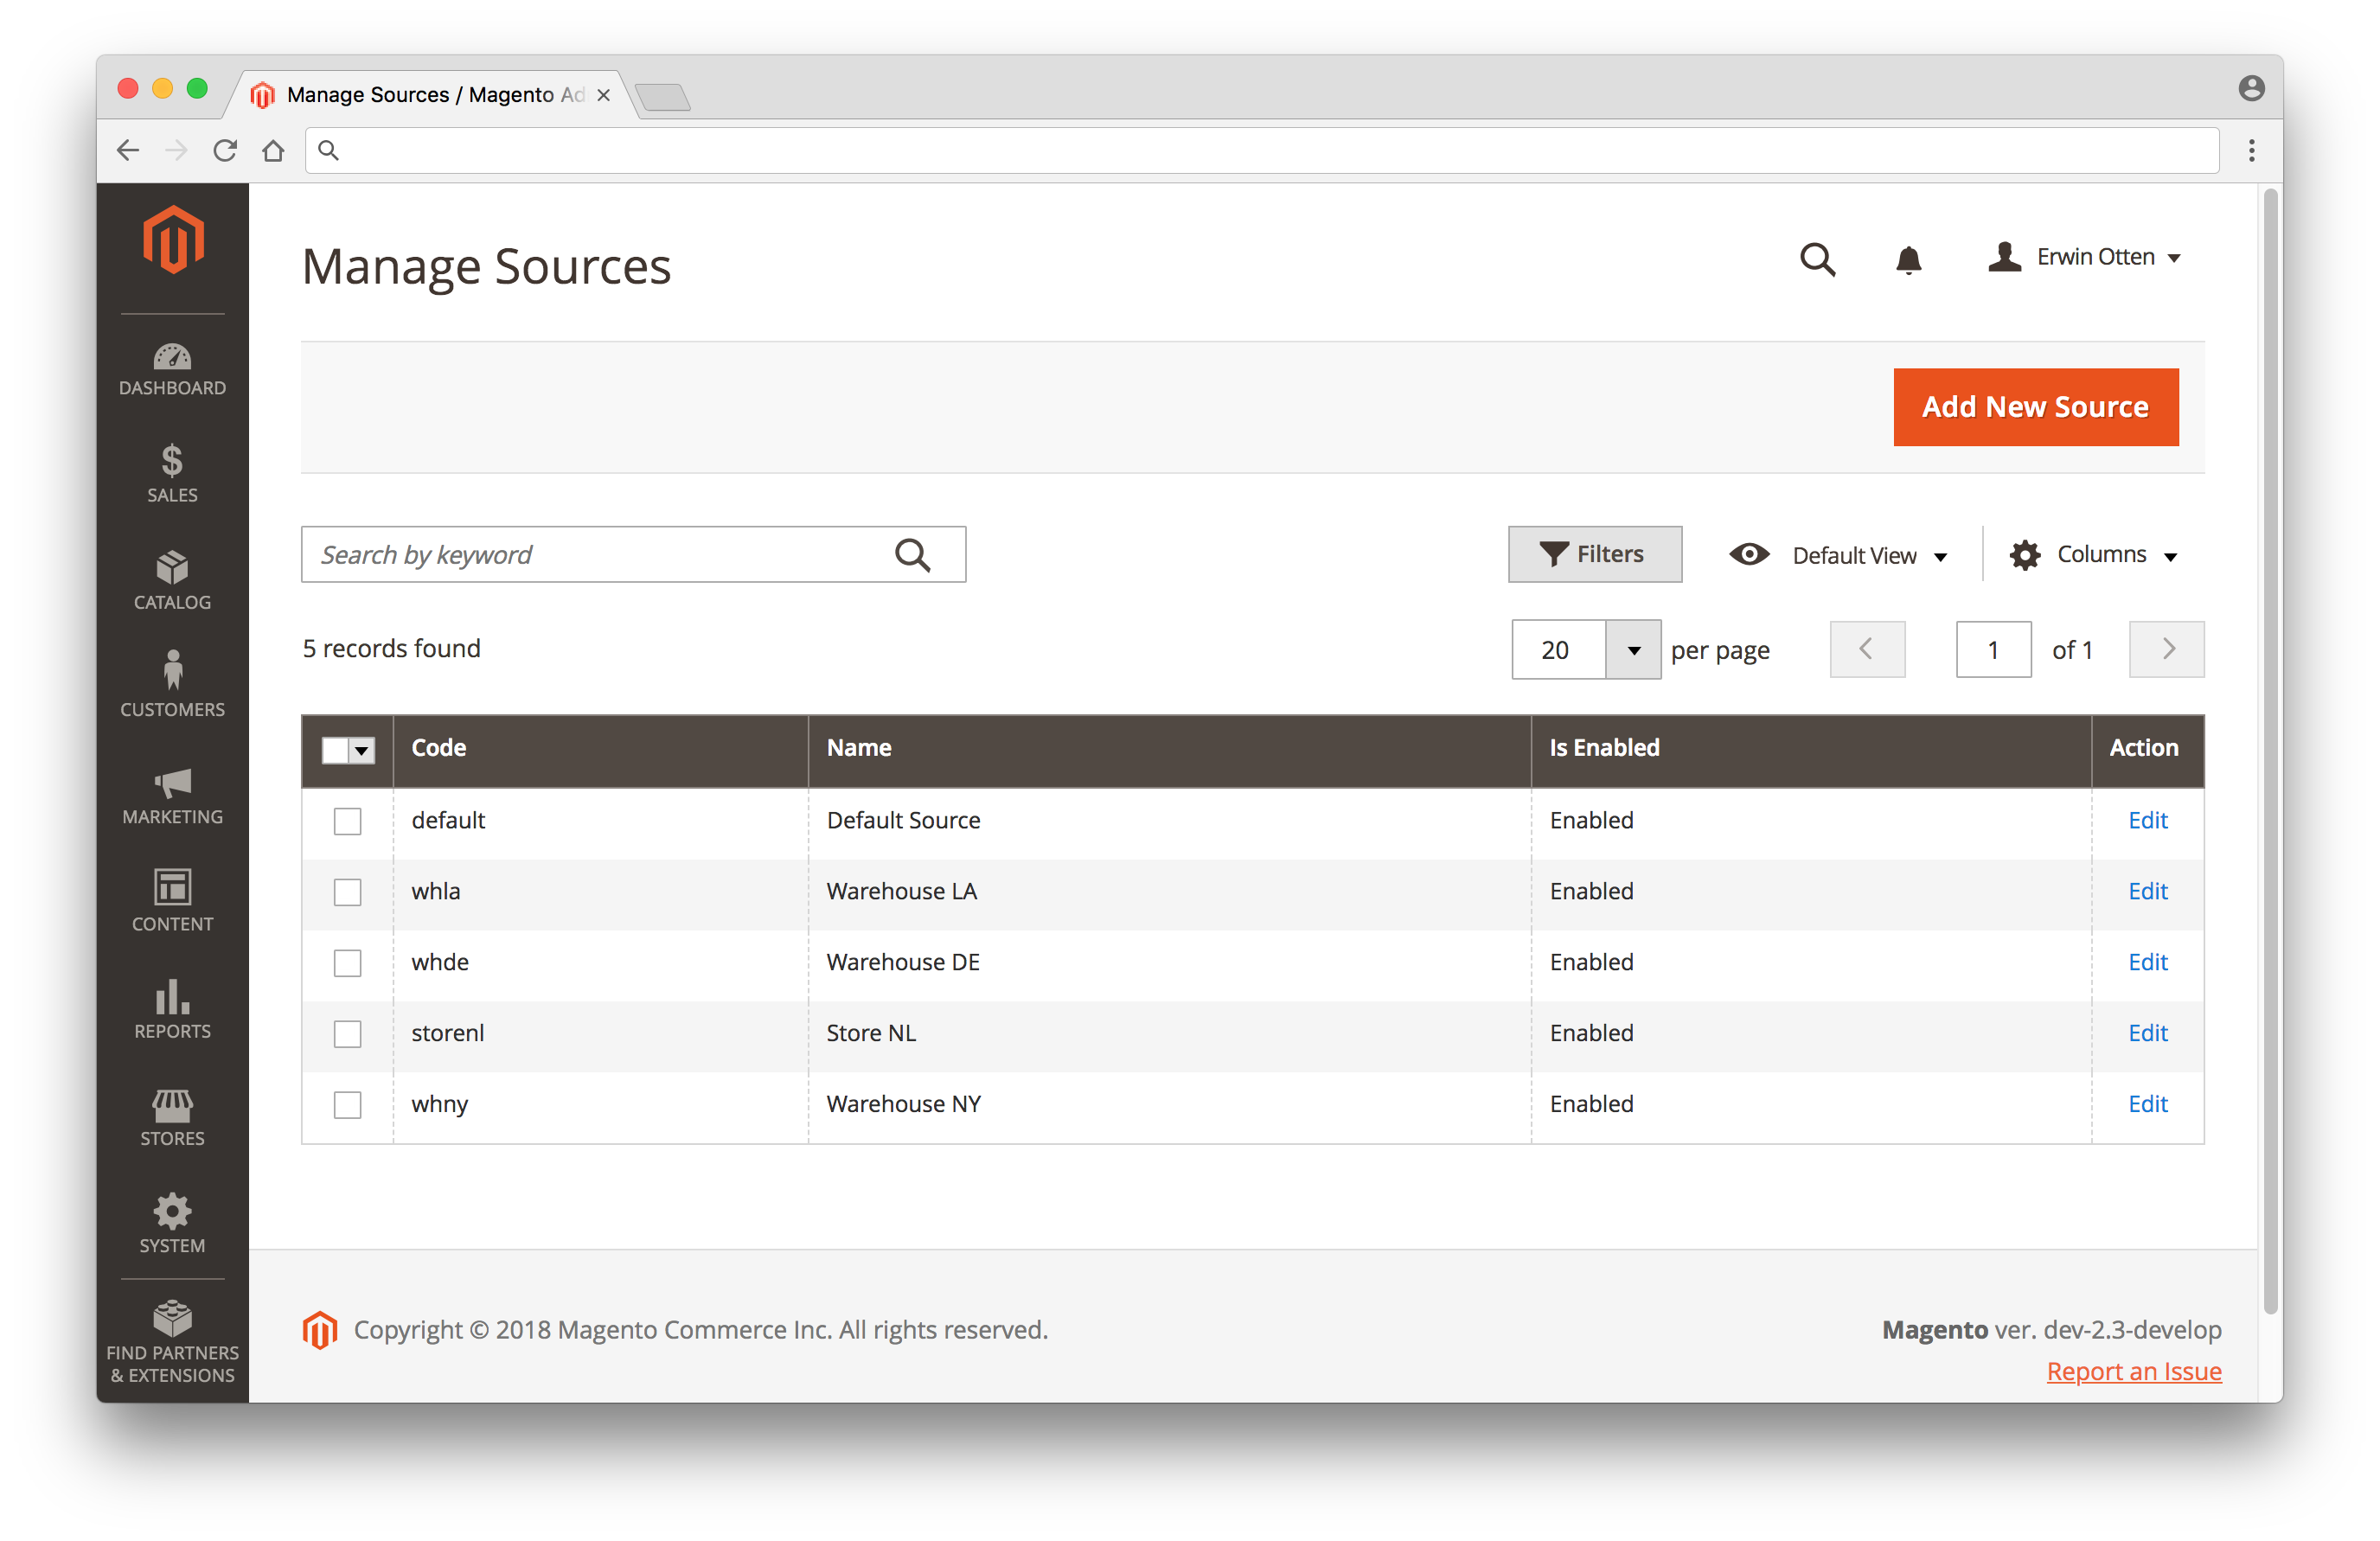 magento-msi-manage-sources.png